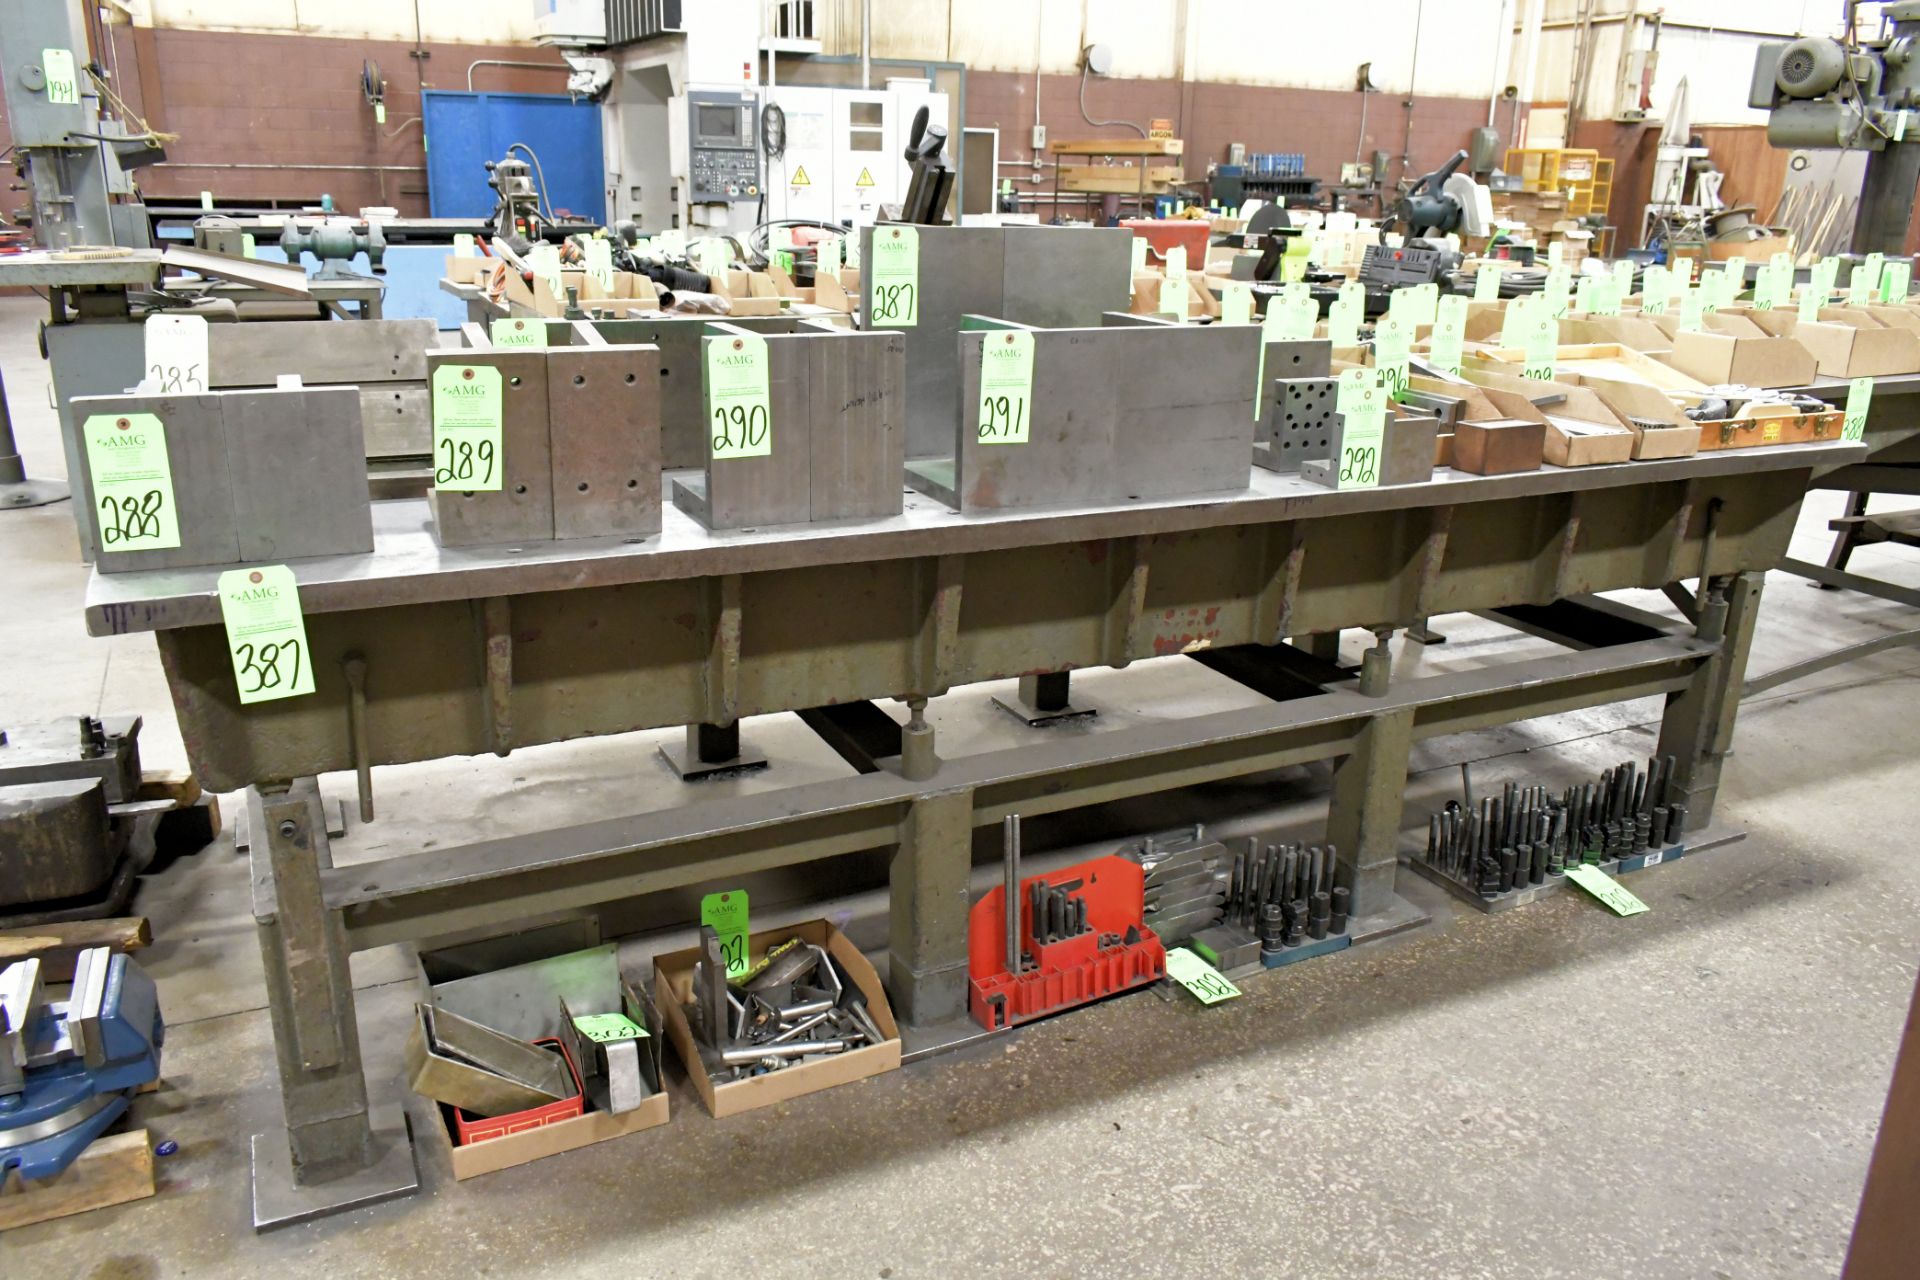 60" x 120" x 1 1/2" Cast Iron Surface Plate on Steel Stand, (Contents Not Included), (Not to Be